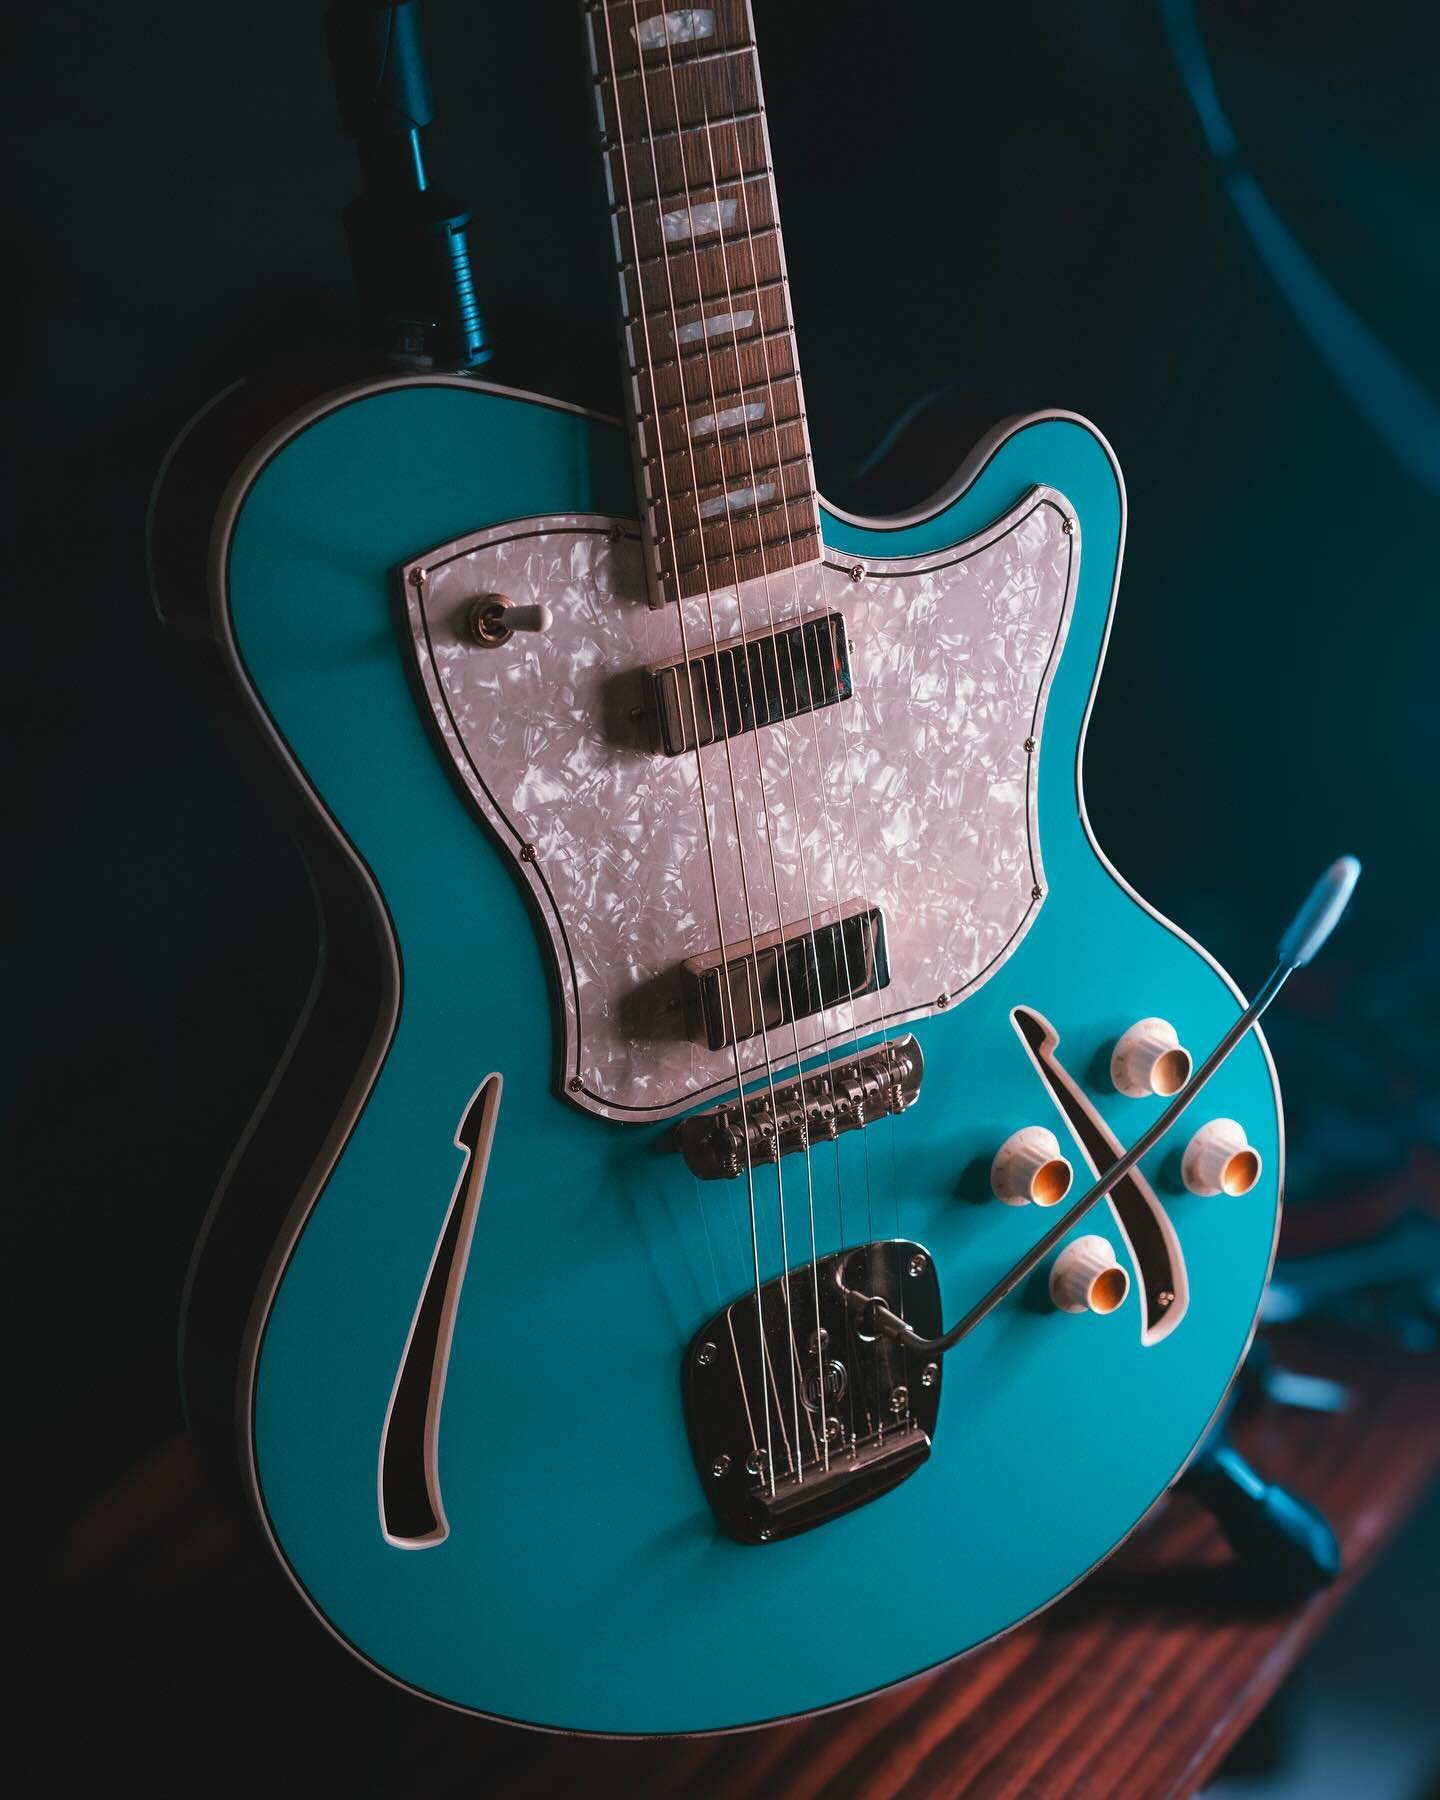 Cool as ice 🧊 @kauerguitars Super Chief in Taos Turquoise with tortoise purfling and white binding, @masterybridge Trem and @descendantvibrato Bridge, and @lollarpickups Firebird / Mini Humbucker combo. Jaw dropper. 

Check out the full demo on my ?